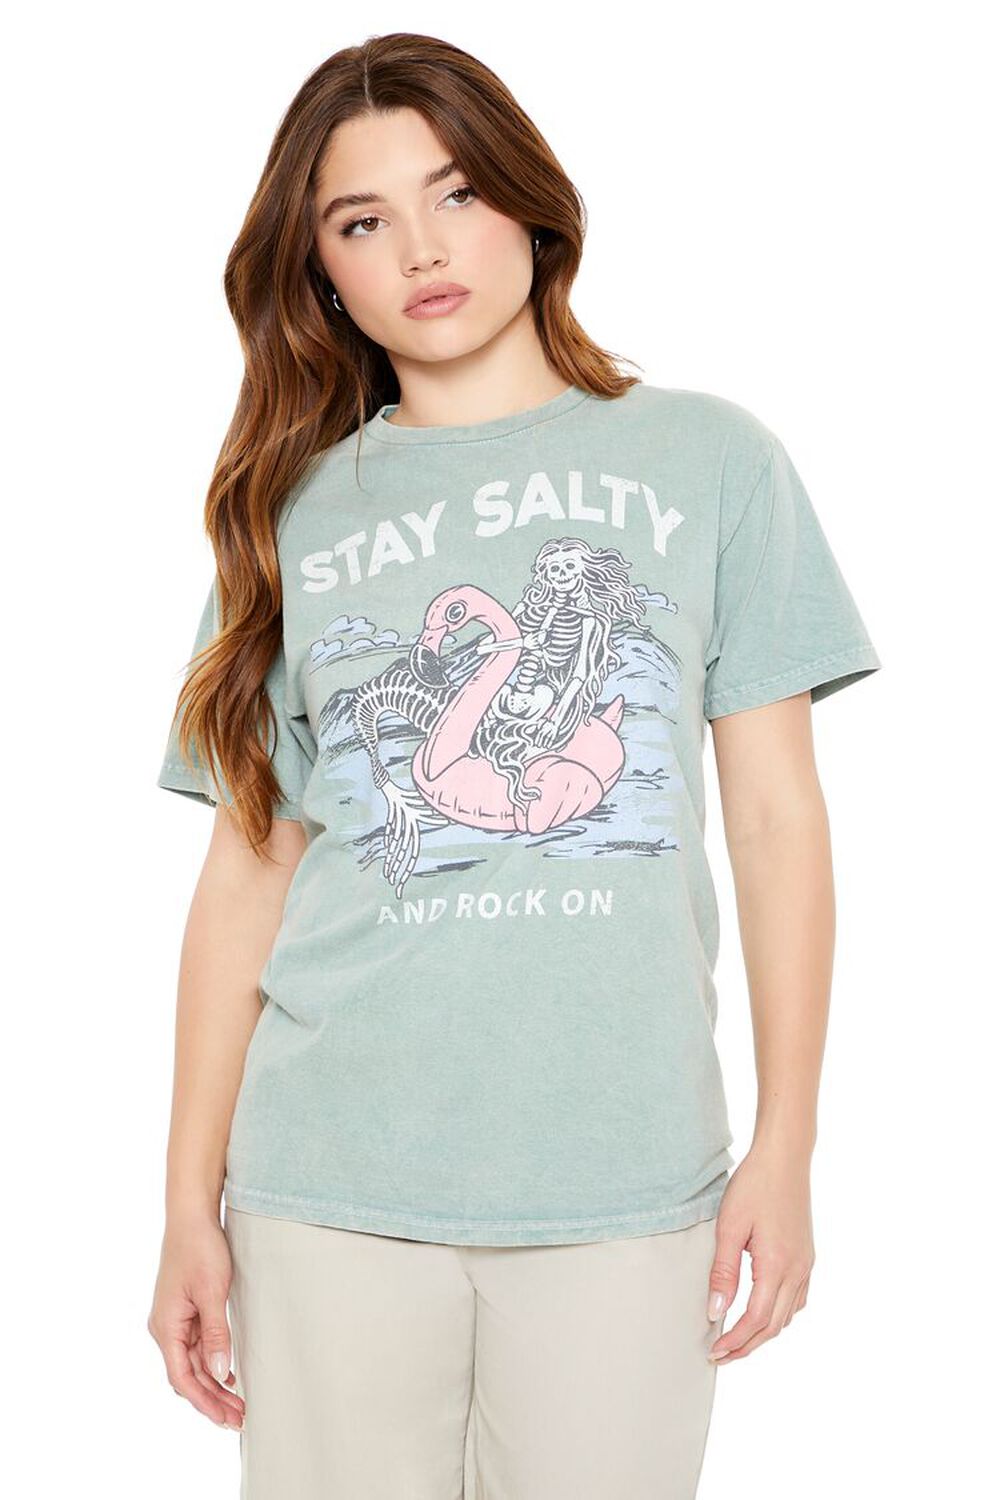 Forever 21 Women's Stay Salty Skeleton Mermaid T-Shirt in Sage Green, M/L | Concert & Festival Clothes | Logo | 100% Cotton | F21